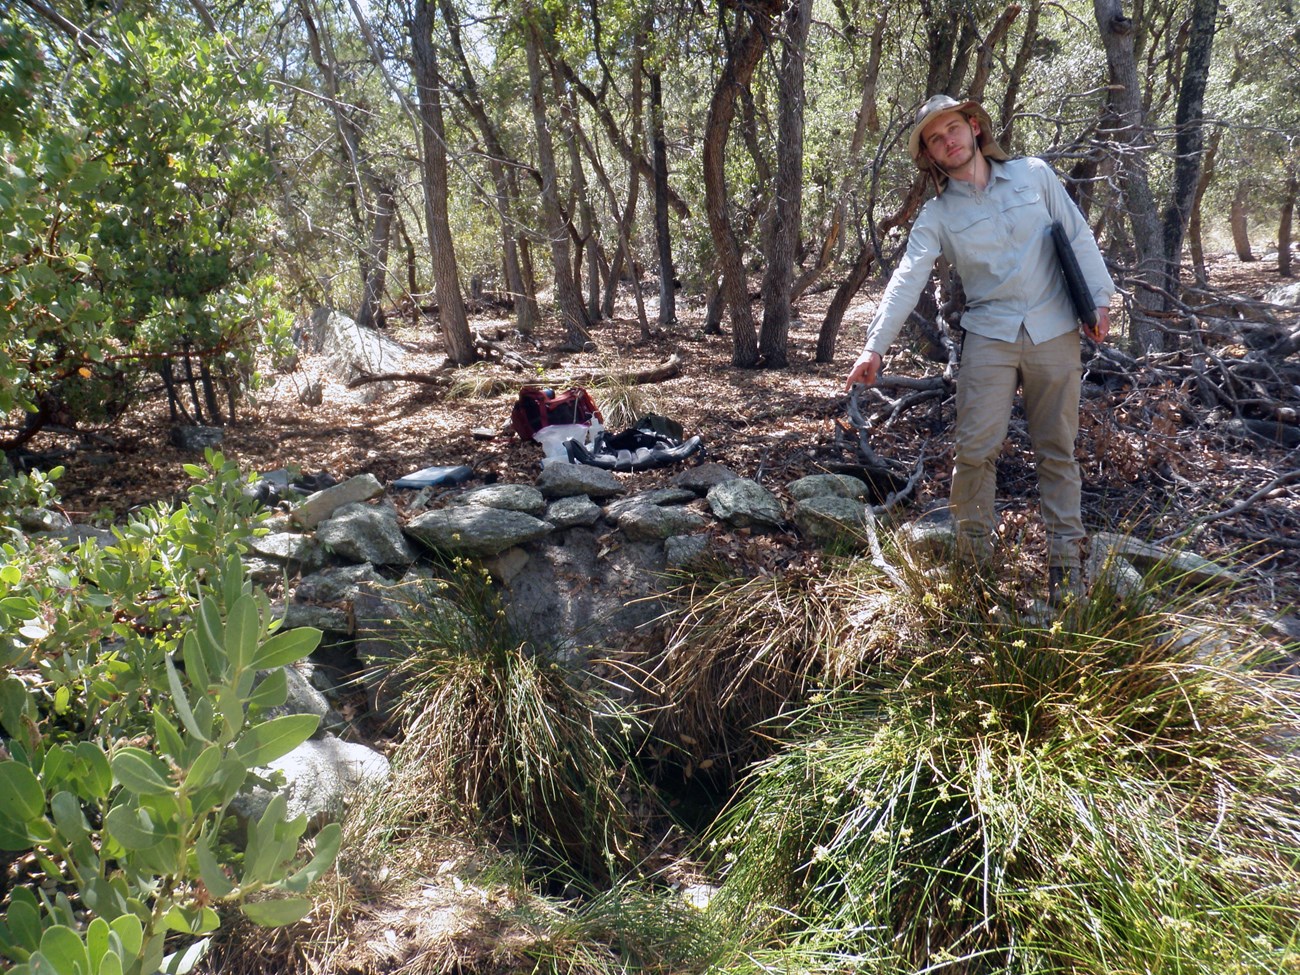 A person pointing towards a pool in a depression lined by rock and sedges in a forest.